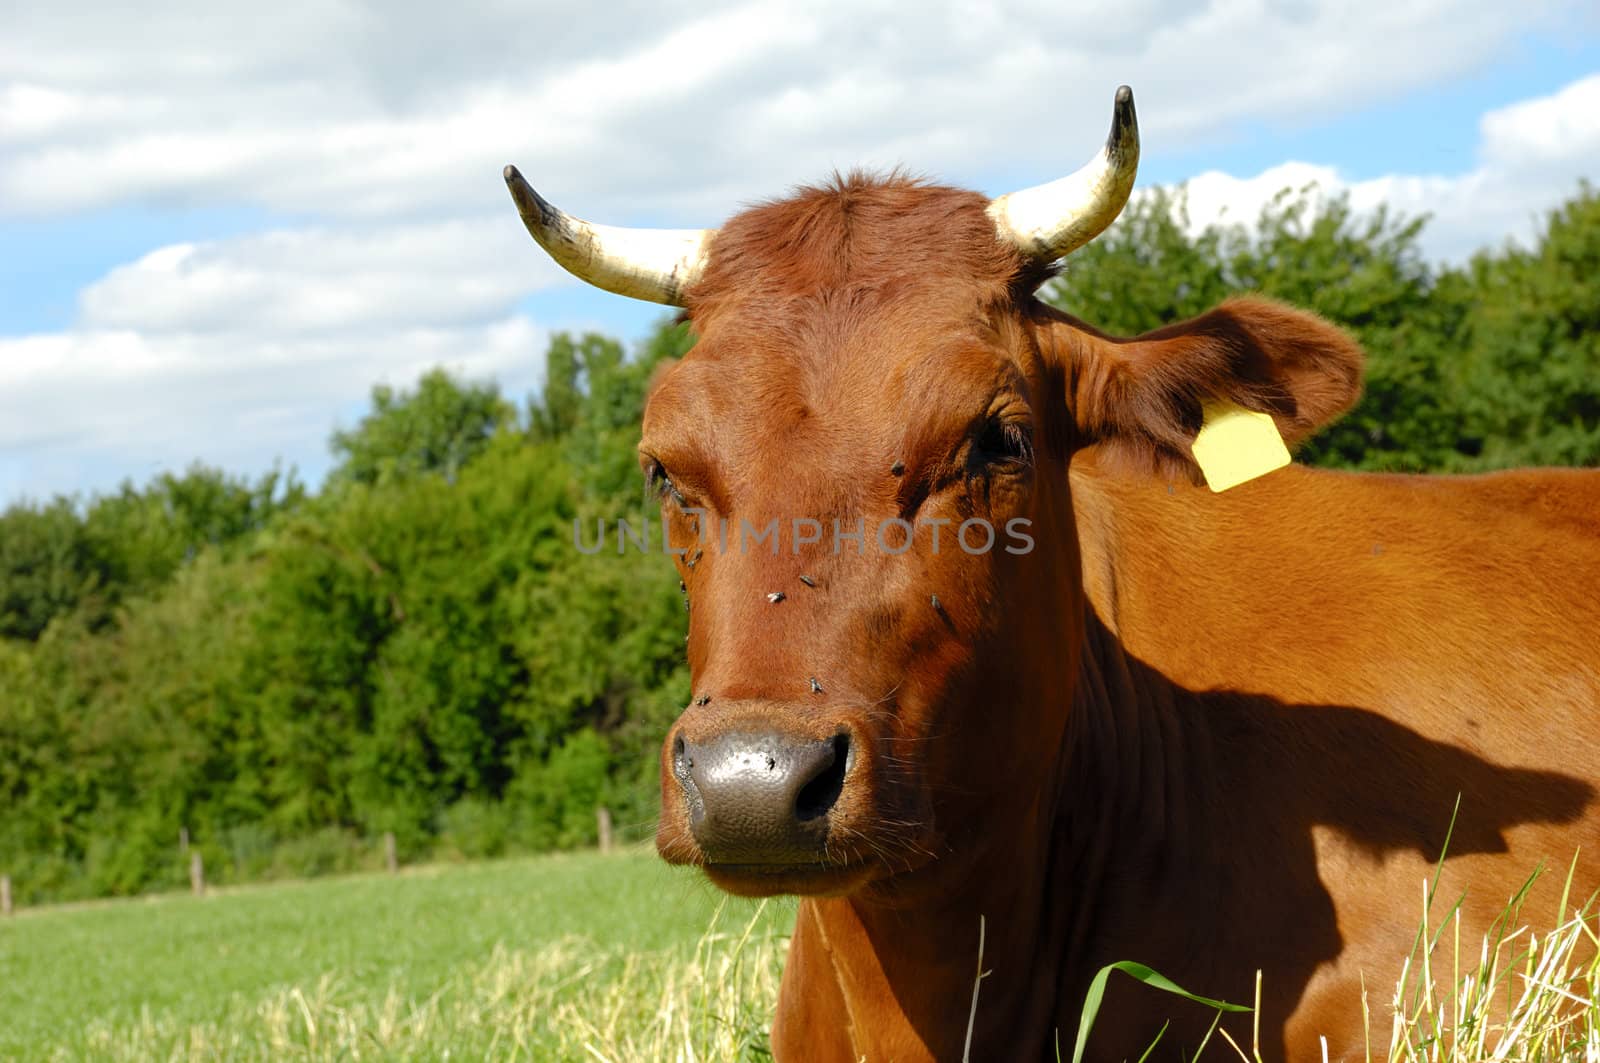 Cow face by cfoto